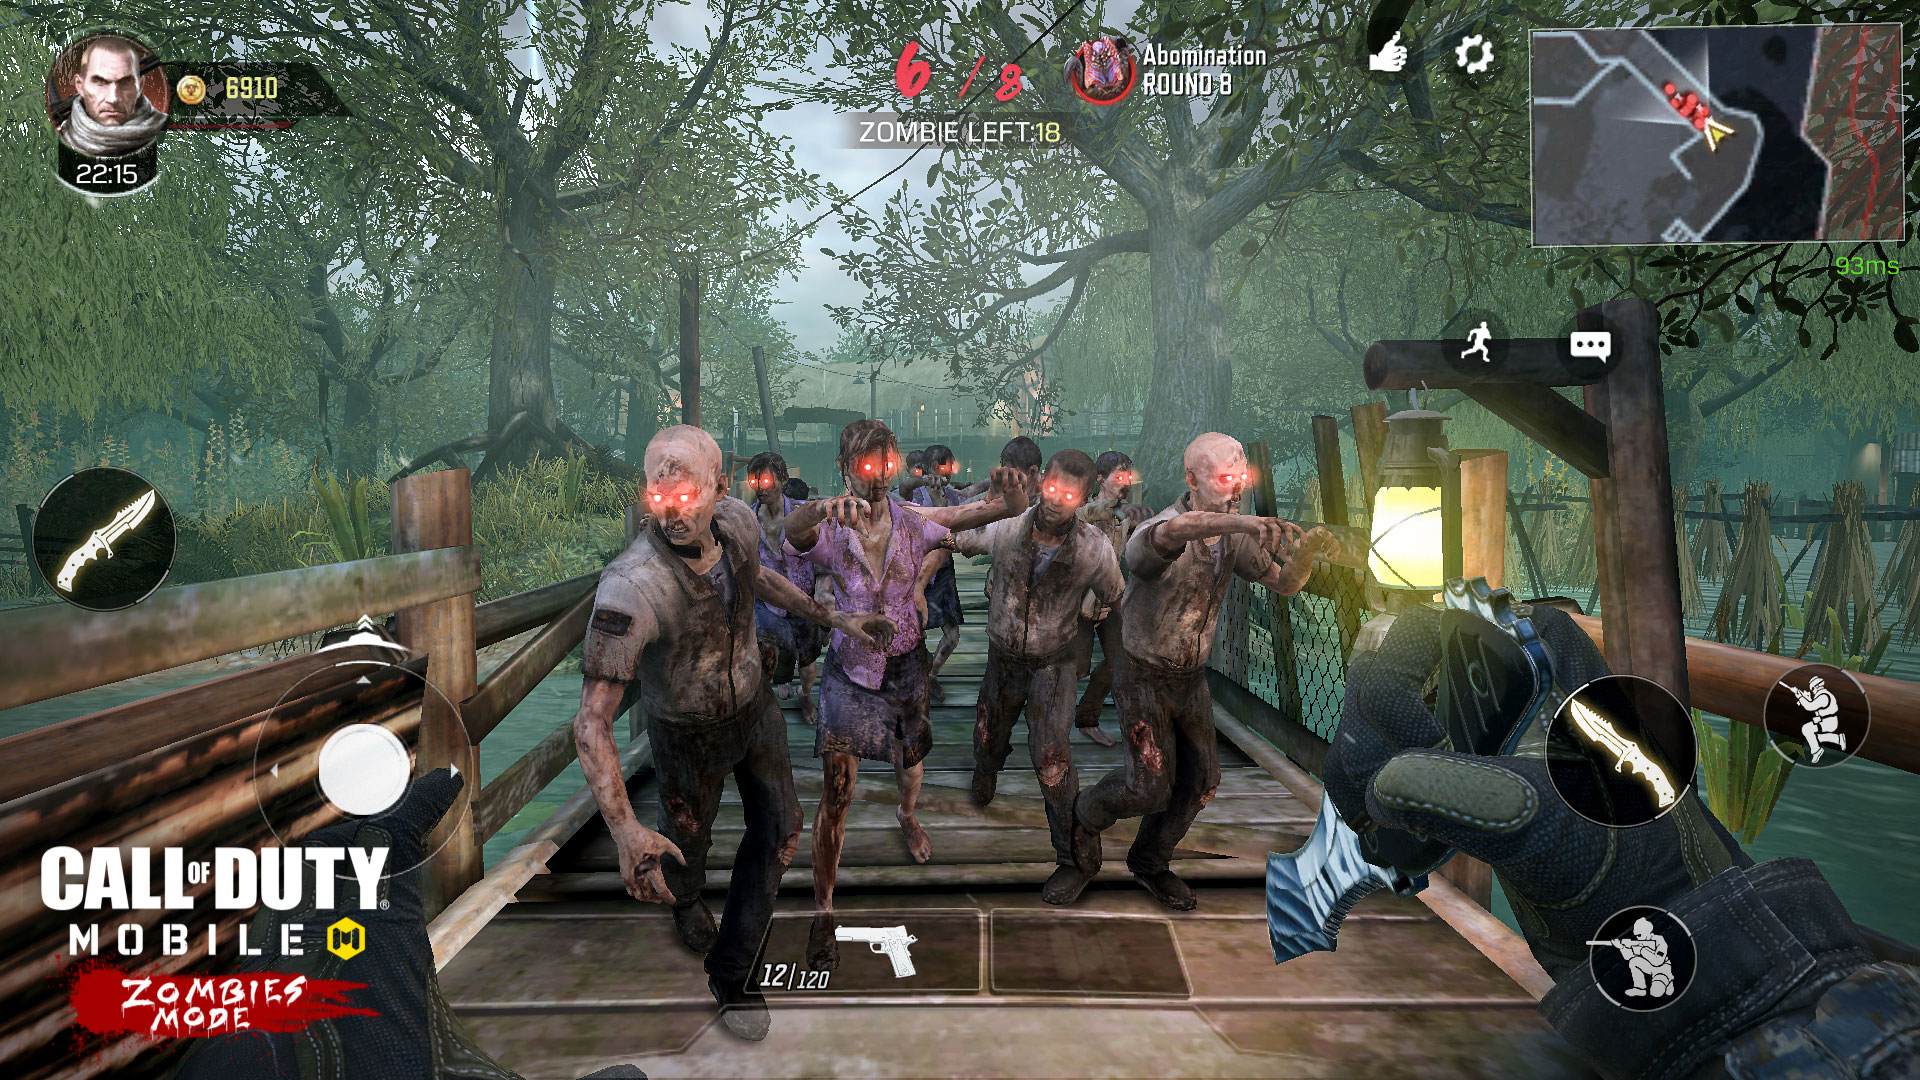 Welcome To Call Of Duty Mobile The Zombies Experience Available For A Limited Time